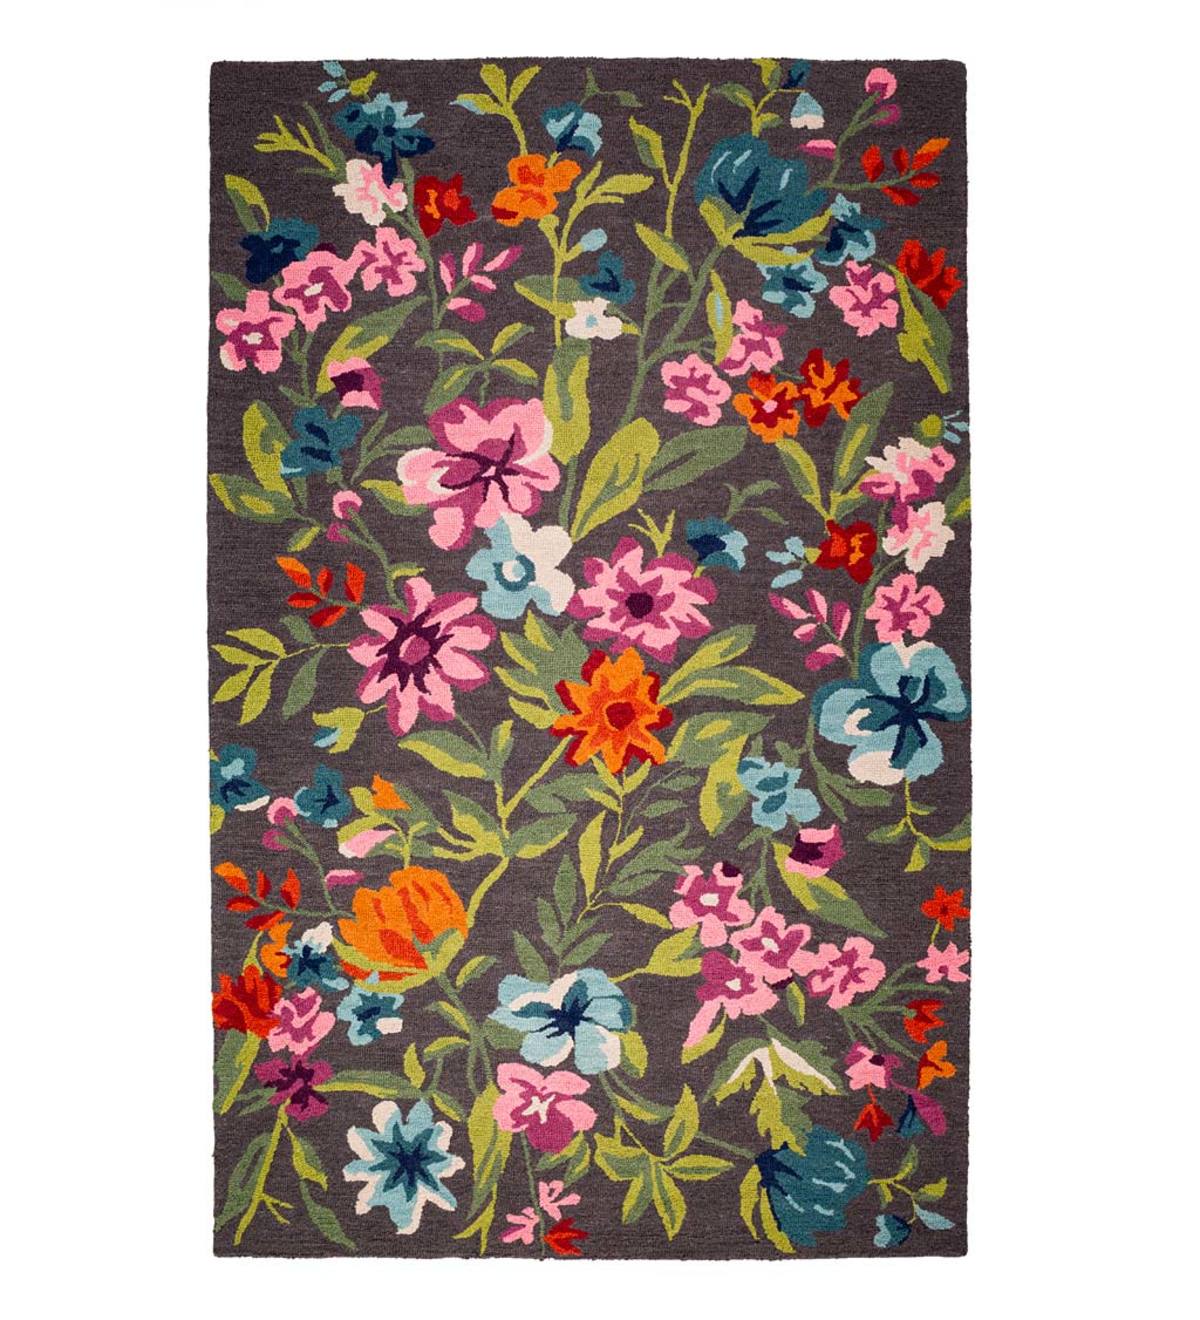 Belle Grove Hand-Tufted Wool Floral Area Rug, 3' x 5'